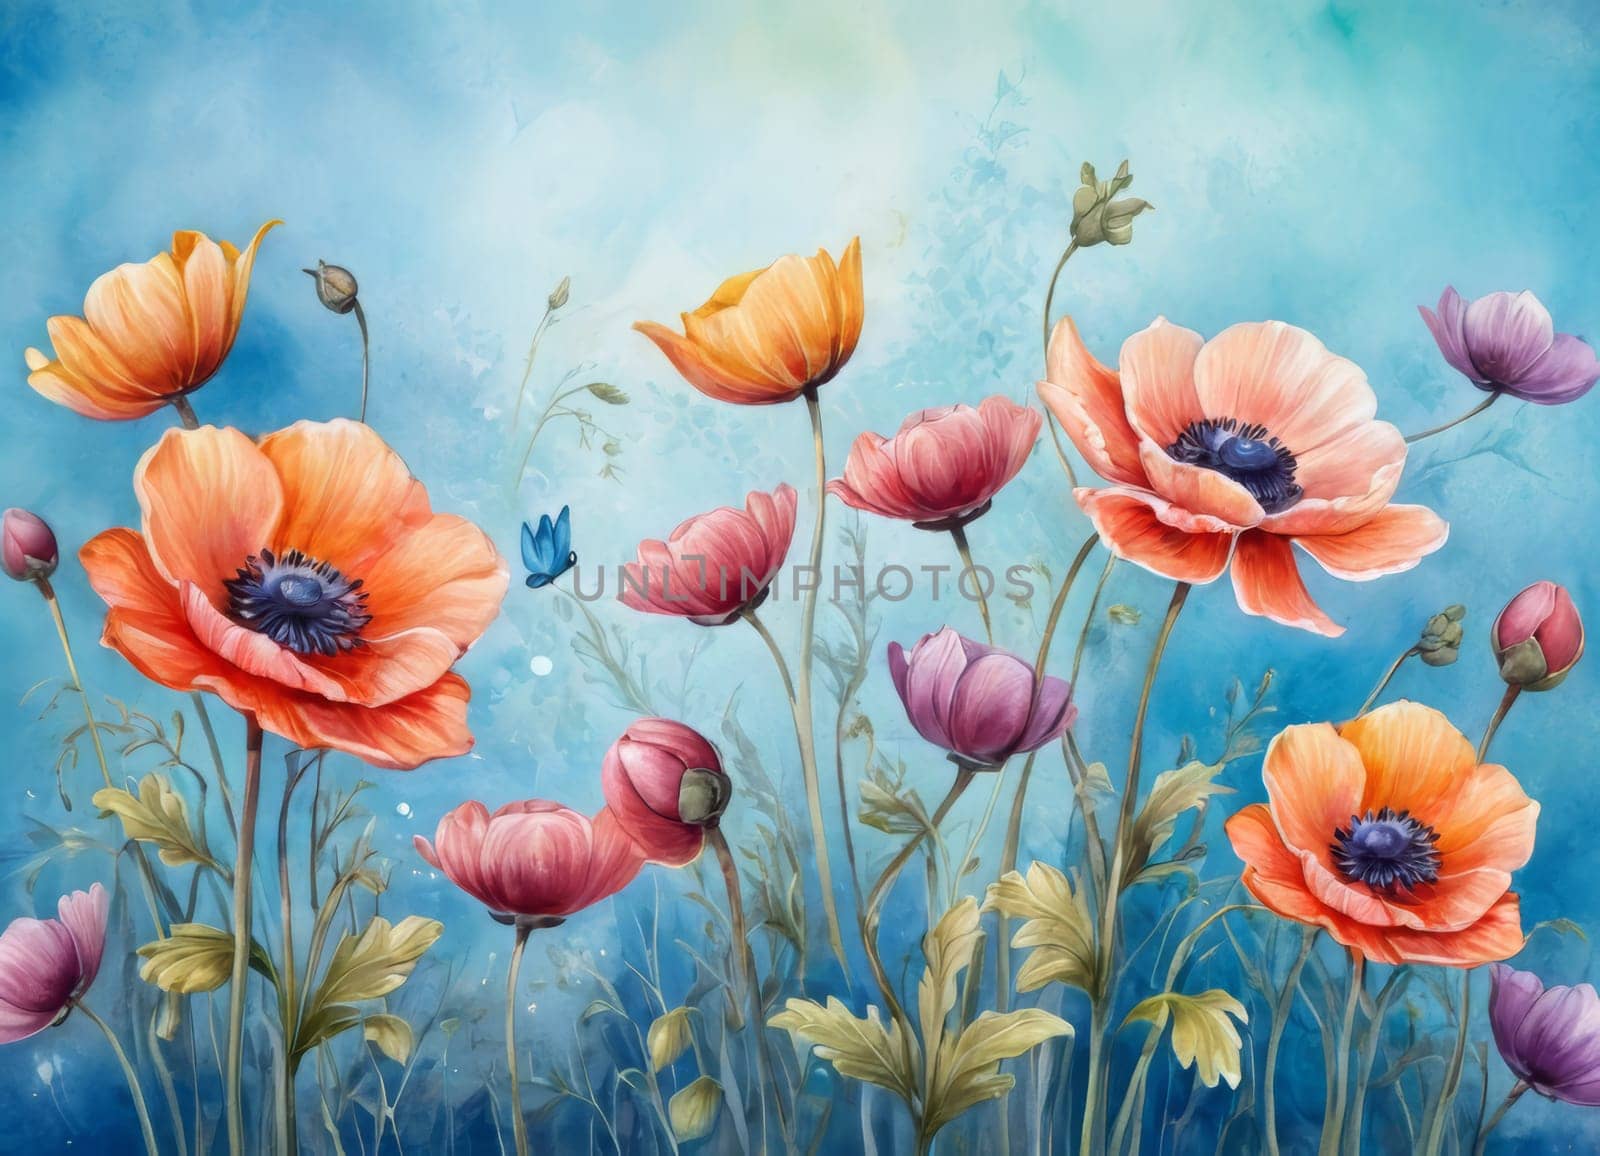 A captivating display of blooming anemones with delicate petals in soft hues against a tranquil blue backdrop. The image evokes a sense of ethereal beauty and serenity. Ideal for conveying themes of nature s elegance and spring s renewal.